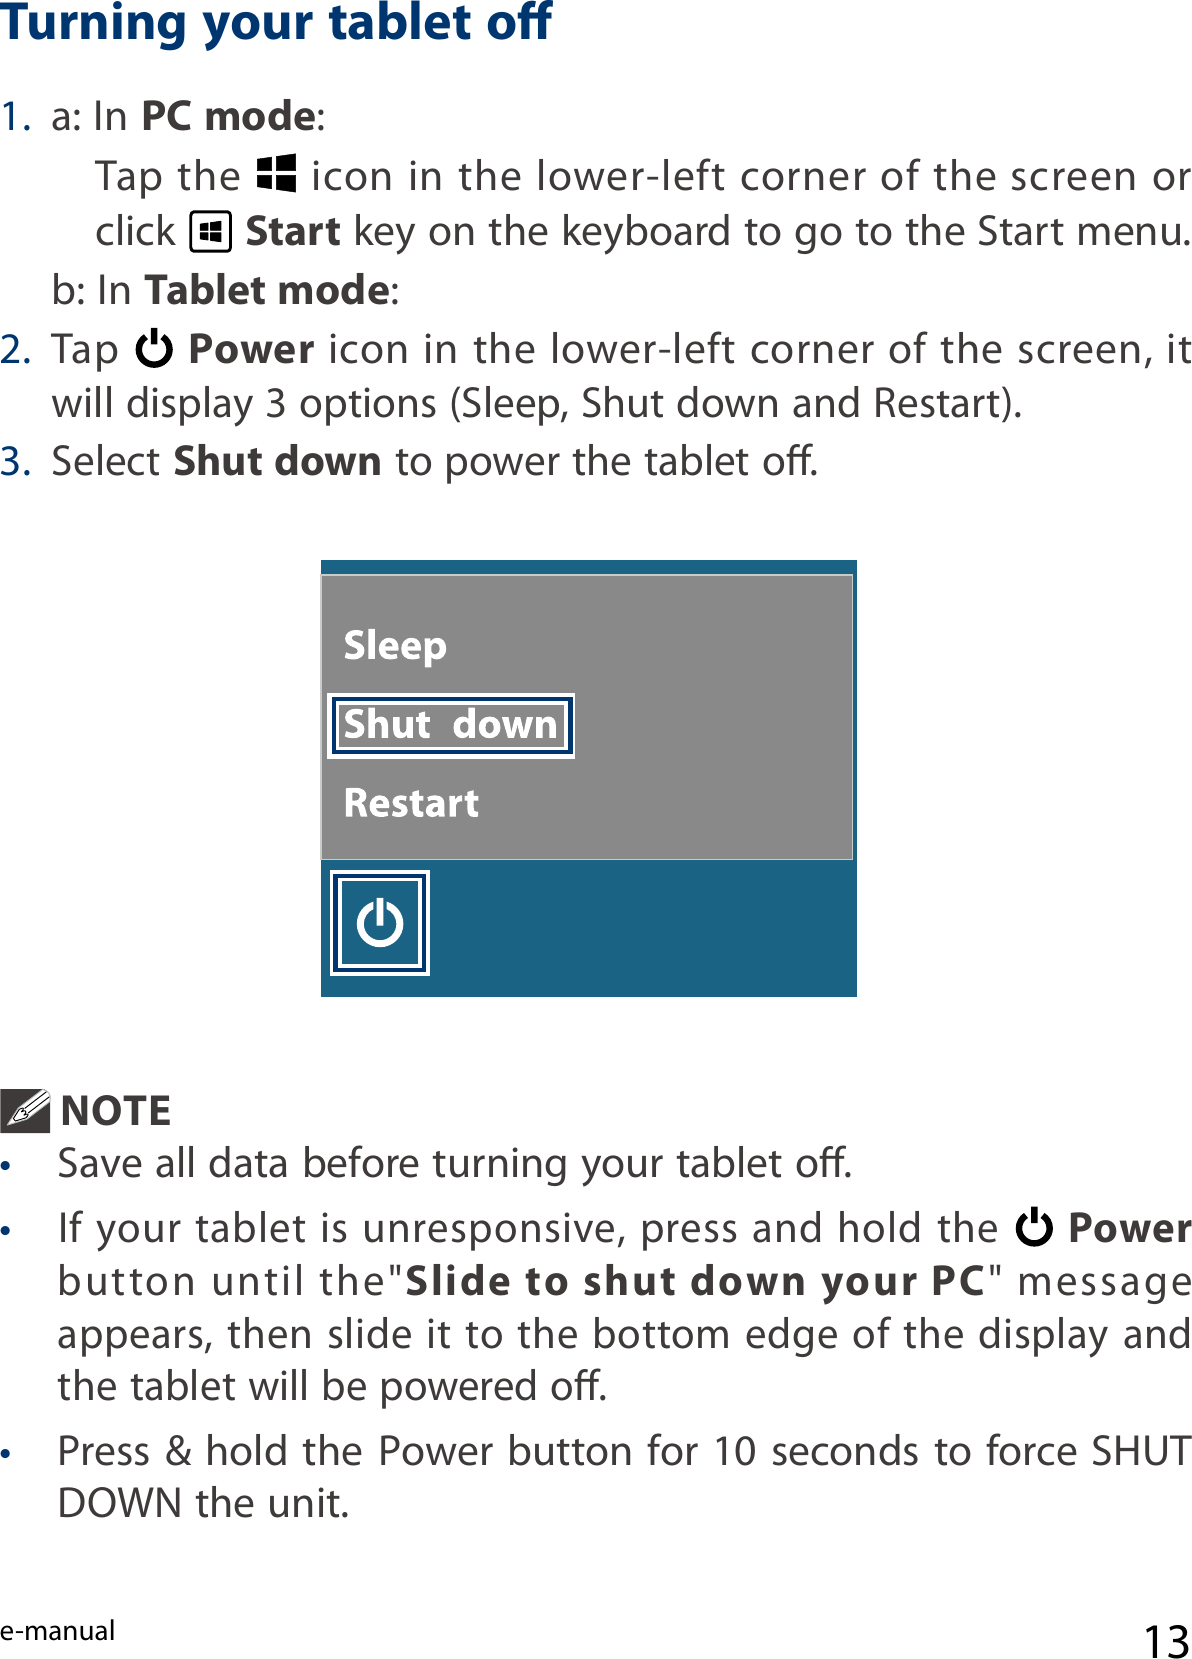 e-manual 131. a: In PC mode: Tap the   icon in the lower-left corner of the screen or click   Start key on the keyboard to go to the Start menu.  b: In Tablet mode:2. Tap   Power icon in the lower-left corner of the screen, it will display 3 options (Sleep, Shut down and Restart). 3. Select Shut down to power the tablet o. Turning your tablet o NOTE •  Save all data before turning your tablet o.• If your tablet  is  unresponsive,  press and  hold  the  Power button  until  the&quot;Slide to shut down your PC&quot;  message appears, then slide it to the bottom edge of the display and the tablet will be powered o.• Press &amp; hold the Power button for 10 seconds to force SHUT DOWN the unit.